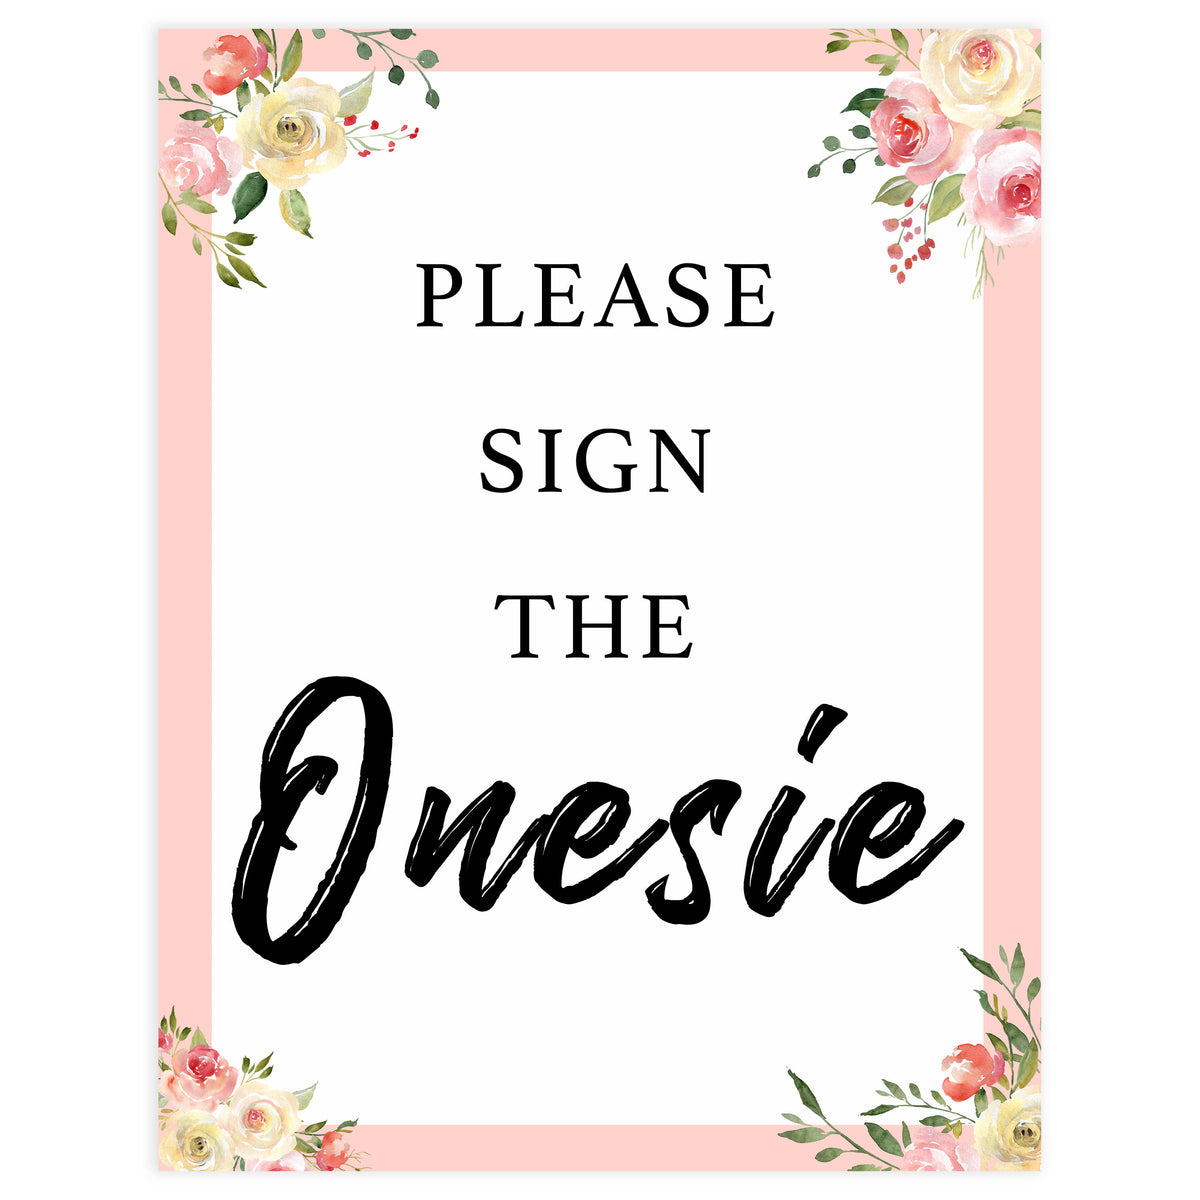 please sign the onesie, sign the onesie, Printable baby shower games, floral fun baby games, baby shower games, fun baby shower ideas, top baby shower ideas, floral baby shower, blue baby shower ideas